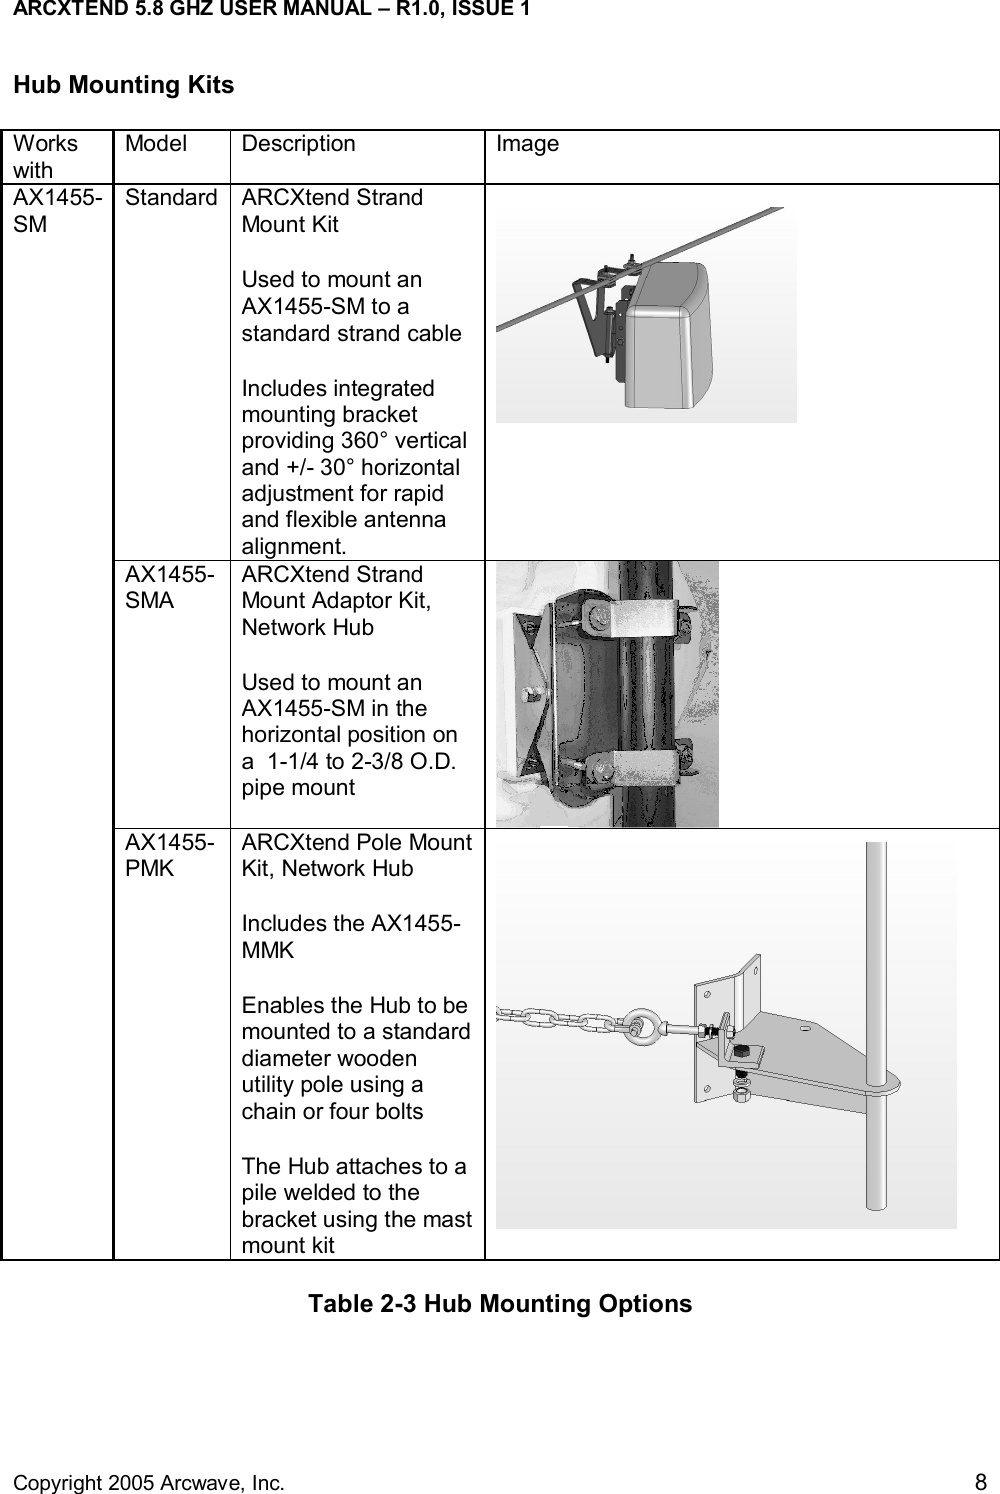 ARCXTEND 5.8 GHZ USER MANUAL – R1.0, ISSUE 1  Copyright 2005 Arcwave, Inc.    8 Hub Mounting Kits Works with Model  Description  Image Standard  ARCXtend Strand Mount Kit  Used to mount an AX1455-SM to a standard strand cable  Includes integrated mounting bracket providing 360° vertical and +/- 30° horizontal adjustment for rapid and flexible antenna alignment.  AX1455-SMA ARCXtend Strand Mount Adaptor Kit, Network Hub  Used to mount an AX1455-SM in the horizontal position on a  1-1/4 to 2-3/8 O.D. pipe mount  AX1455-SM AX1455-PMK ARCXtend Pole Mount Kit, Network Hub  Includes the AX1455-MMK Enables the Hub to be mounted to a standard diameter wooden utility pole using a chain or four bolts The Hub attaches to a pile welded to the bracket using the mast mount kit   Table 2-3 Hub Mounting Options  